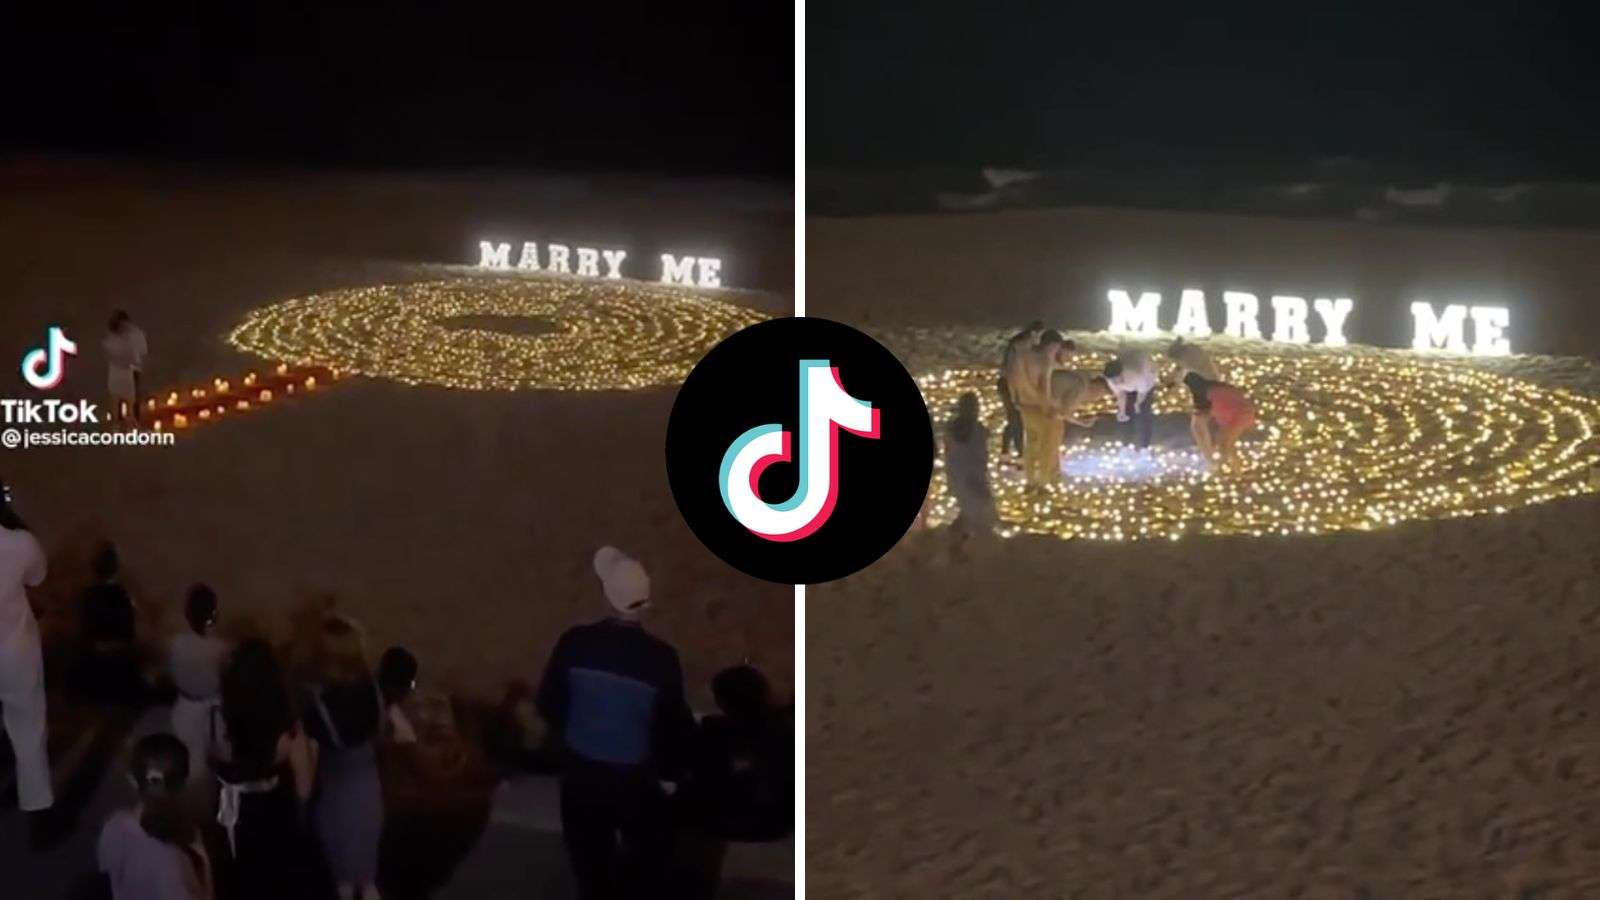 Man’s beachside proposal goes wrong after he loses ring in sand